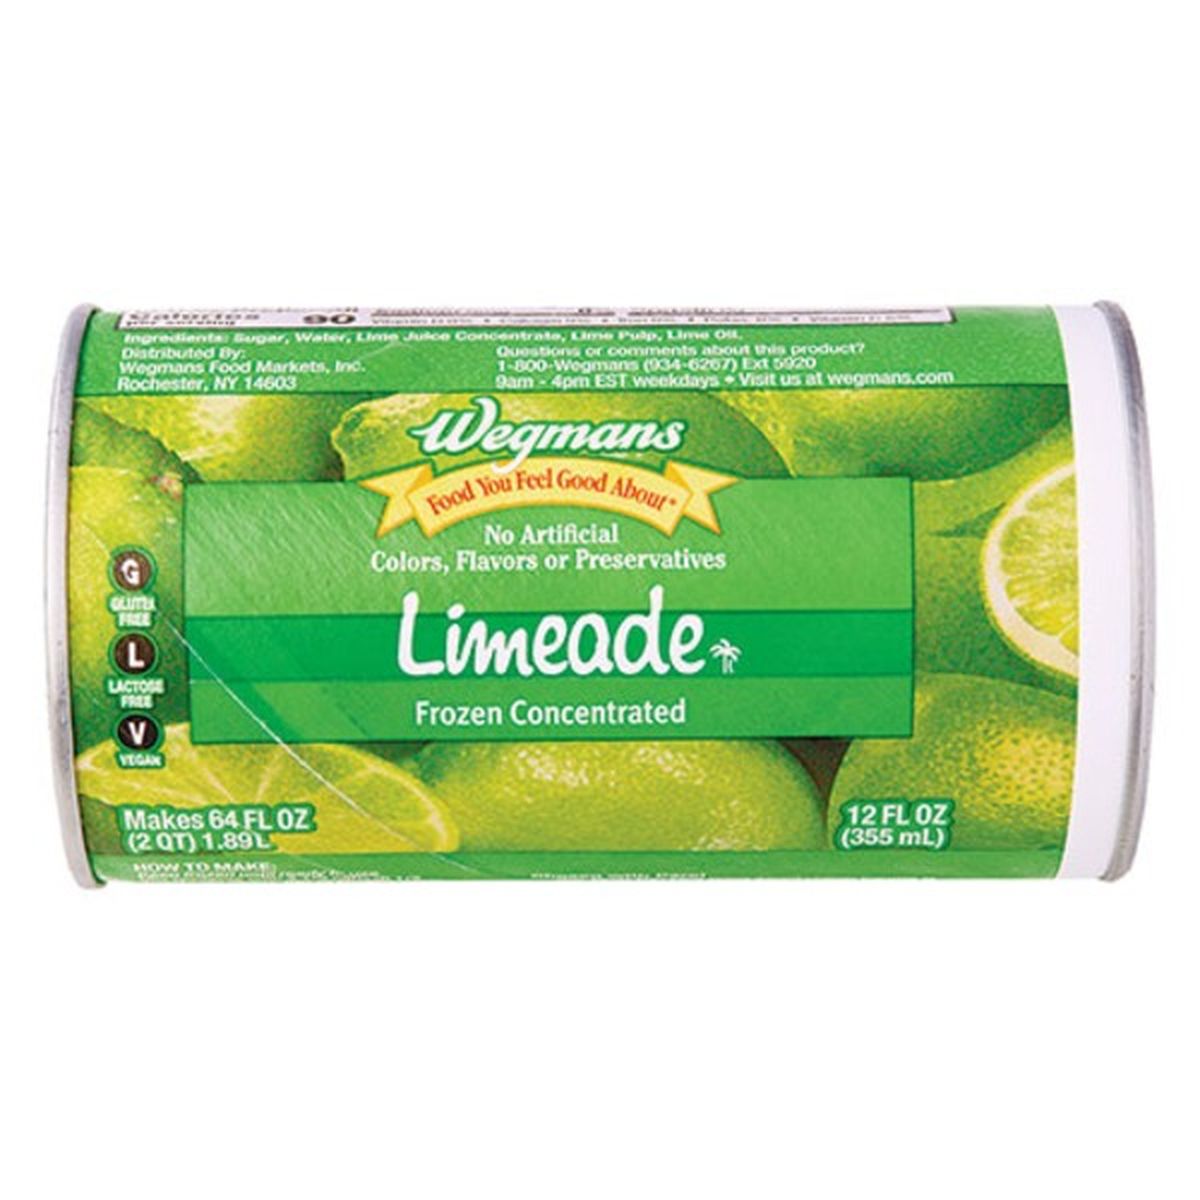 Calories in Wegmans Limeade, Frozen Concentrated